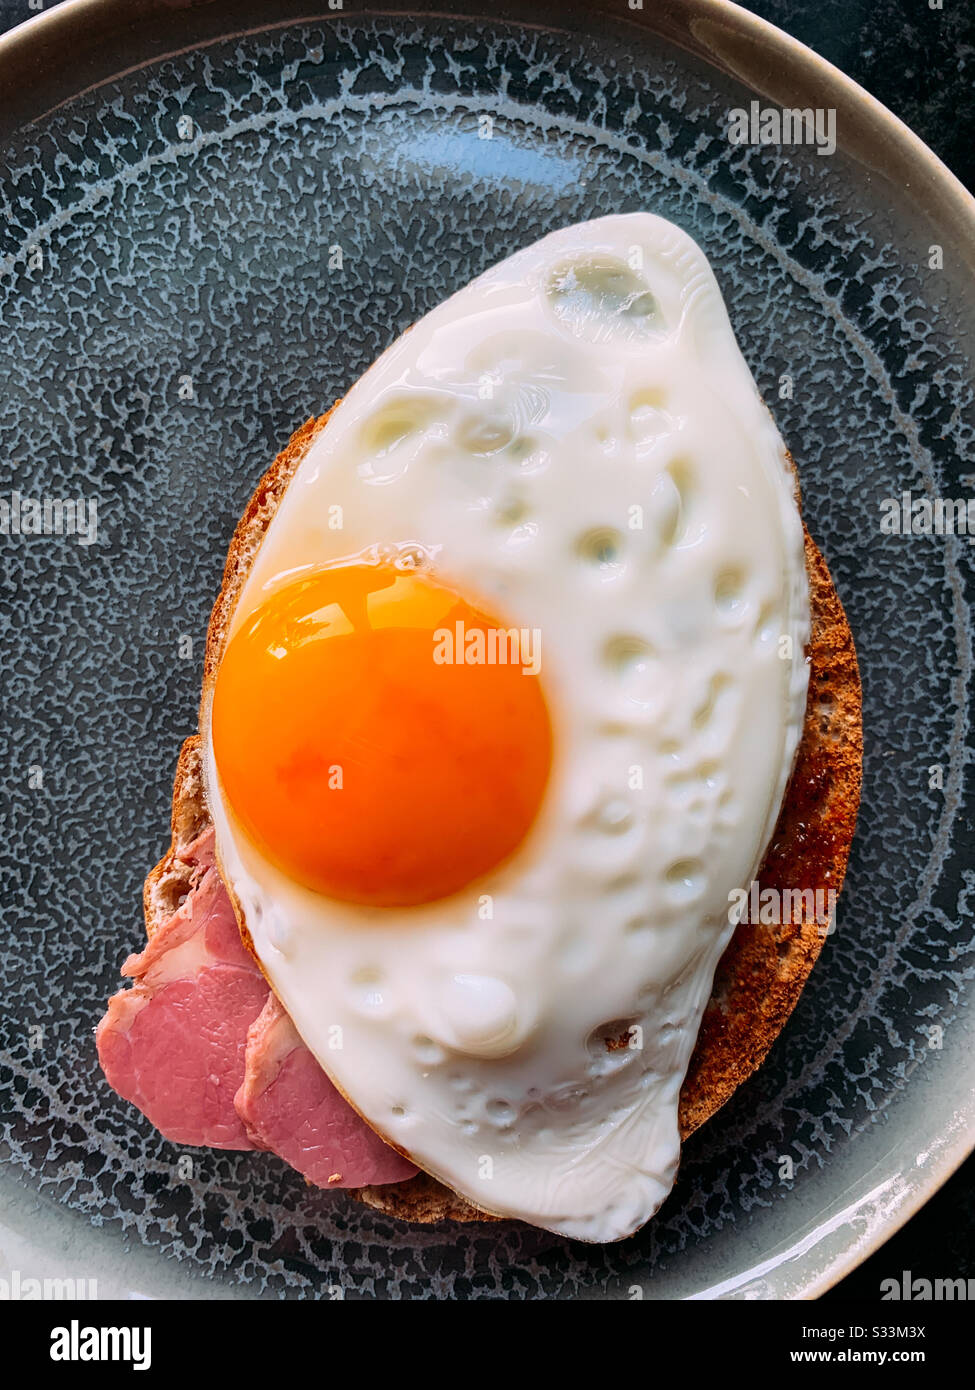 Fried egg and beef toasted wholemeal bagel Stock Photo